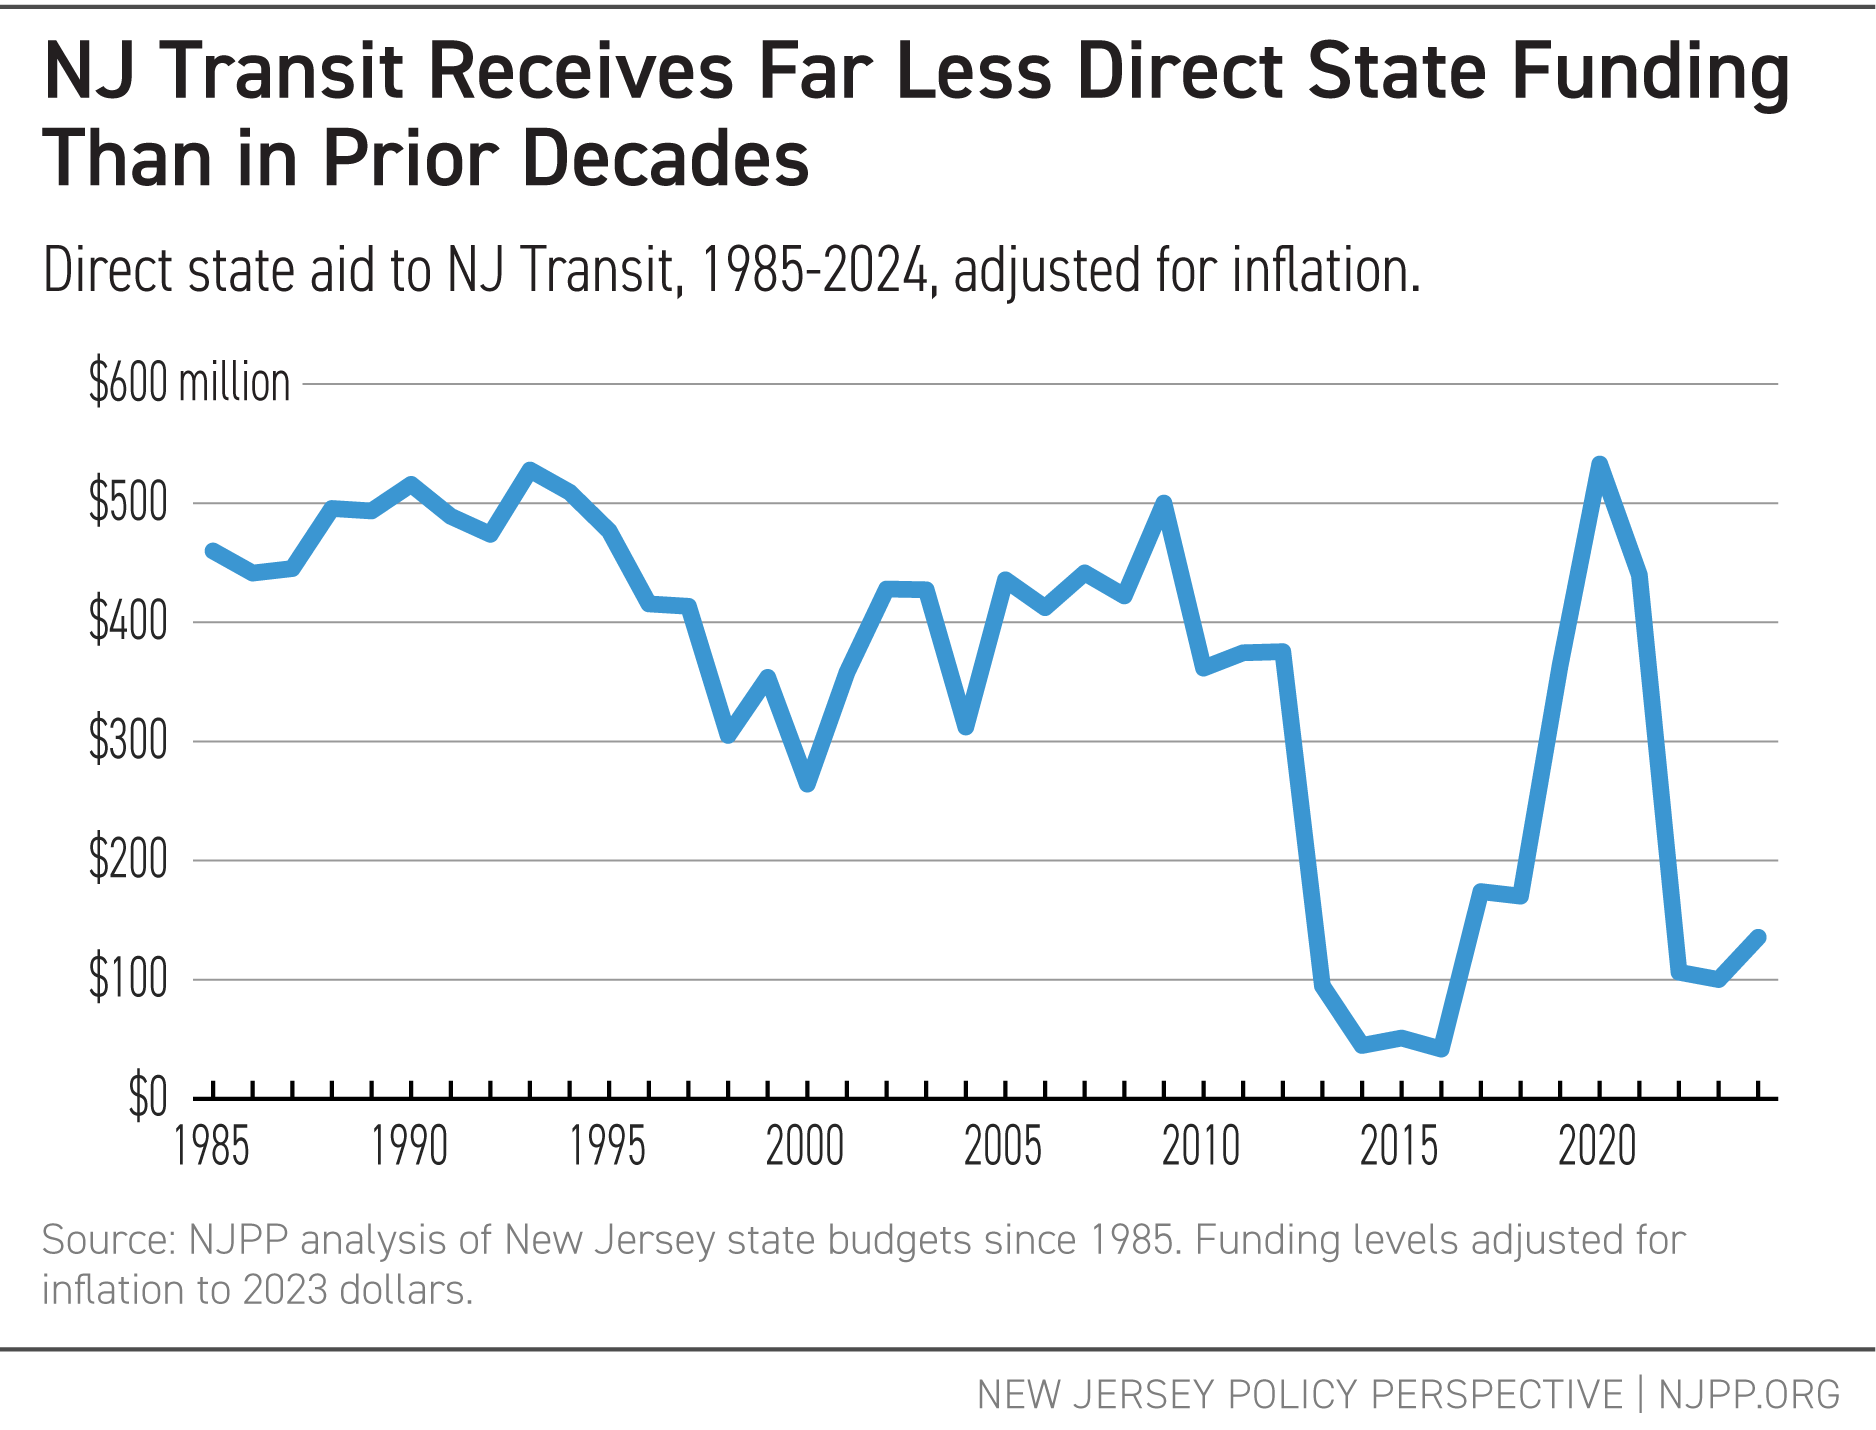 NJ Transit Receives Far Less Direct State Funding Than in Prior Decades